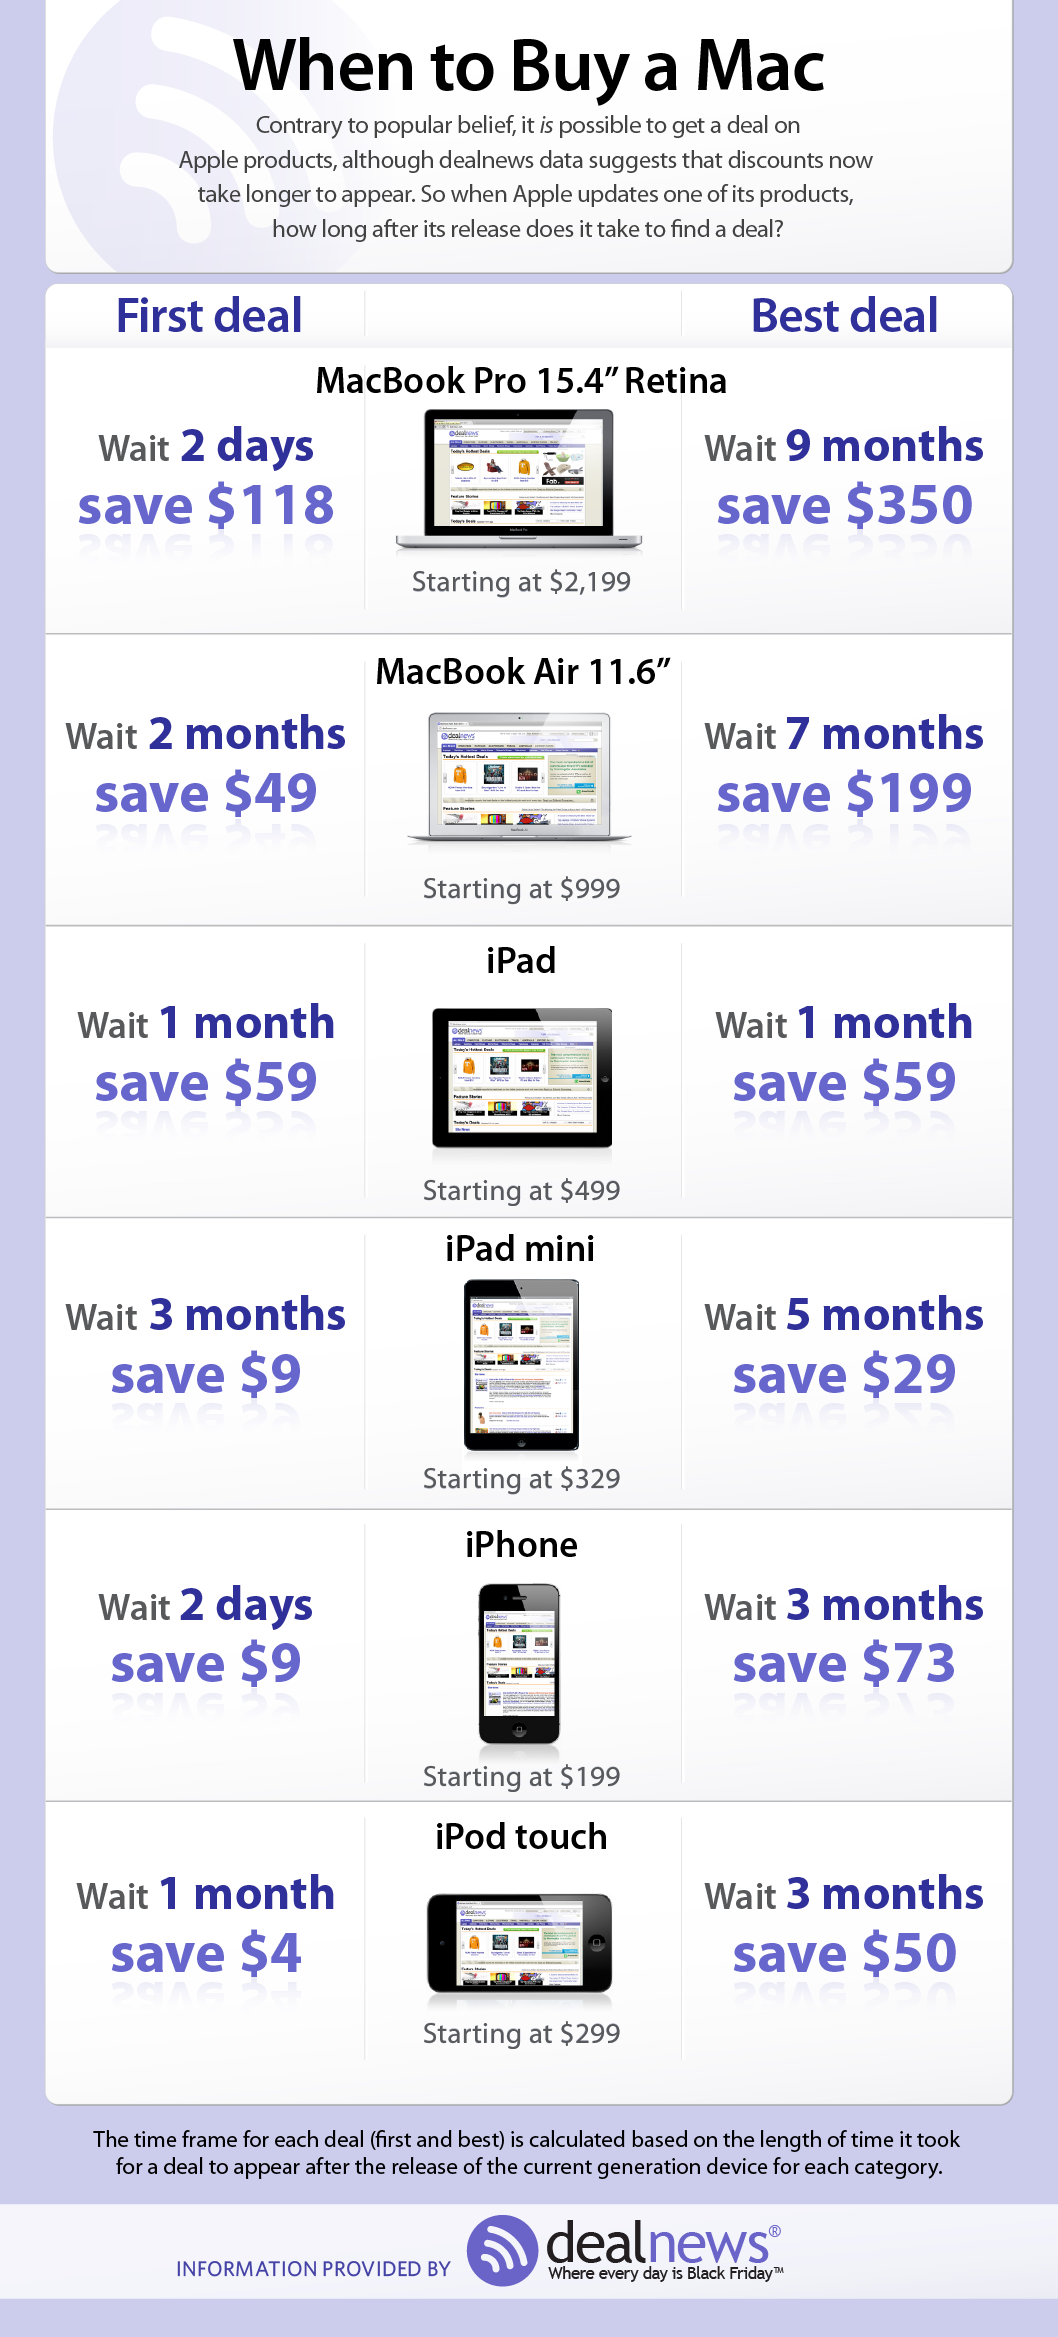 Apple Deals: When To Buy iPhones, iPads, and Macs {Infographic}